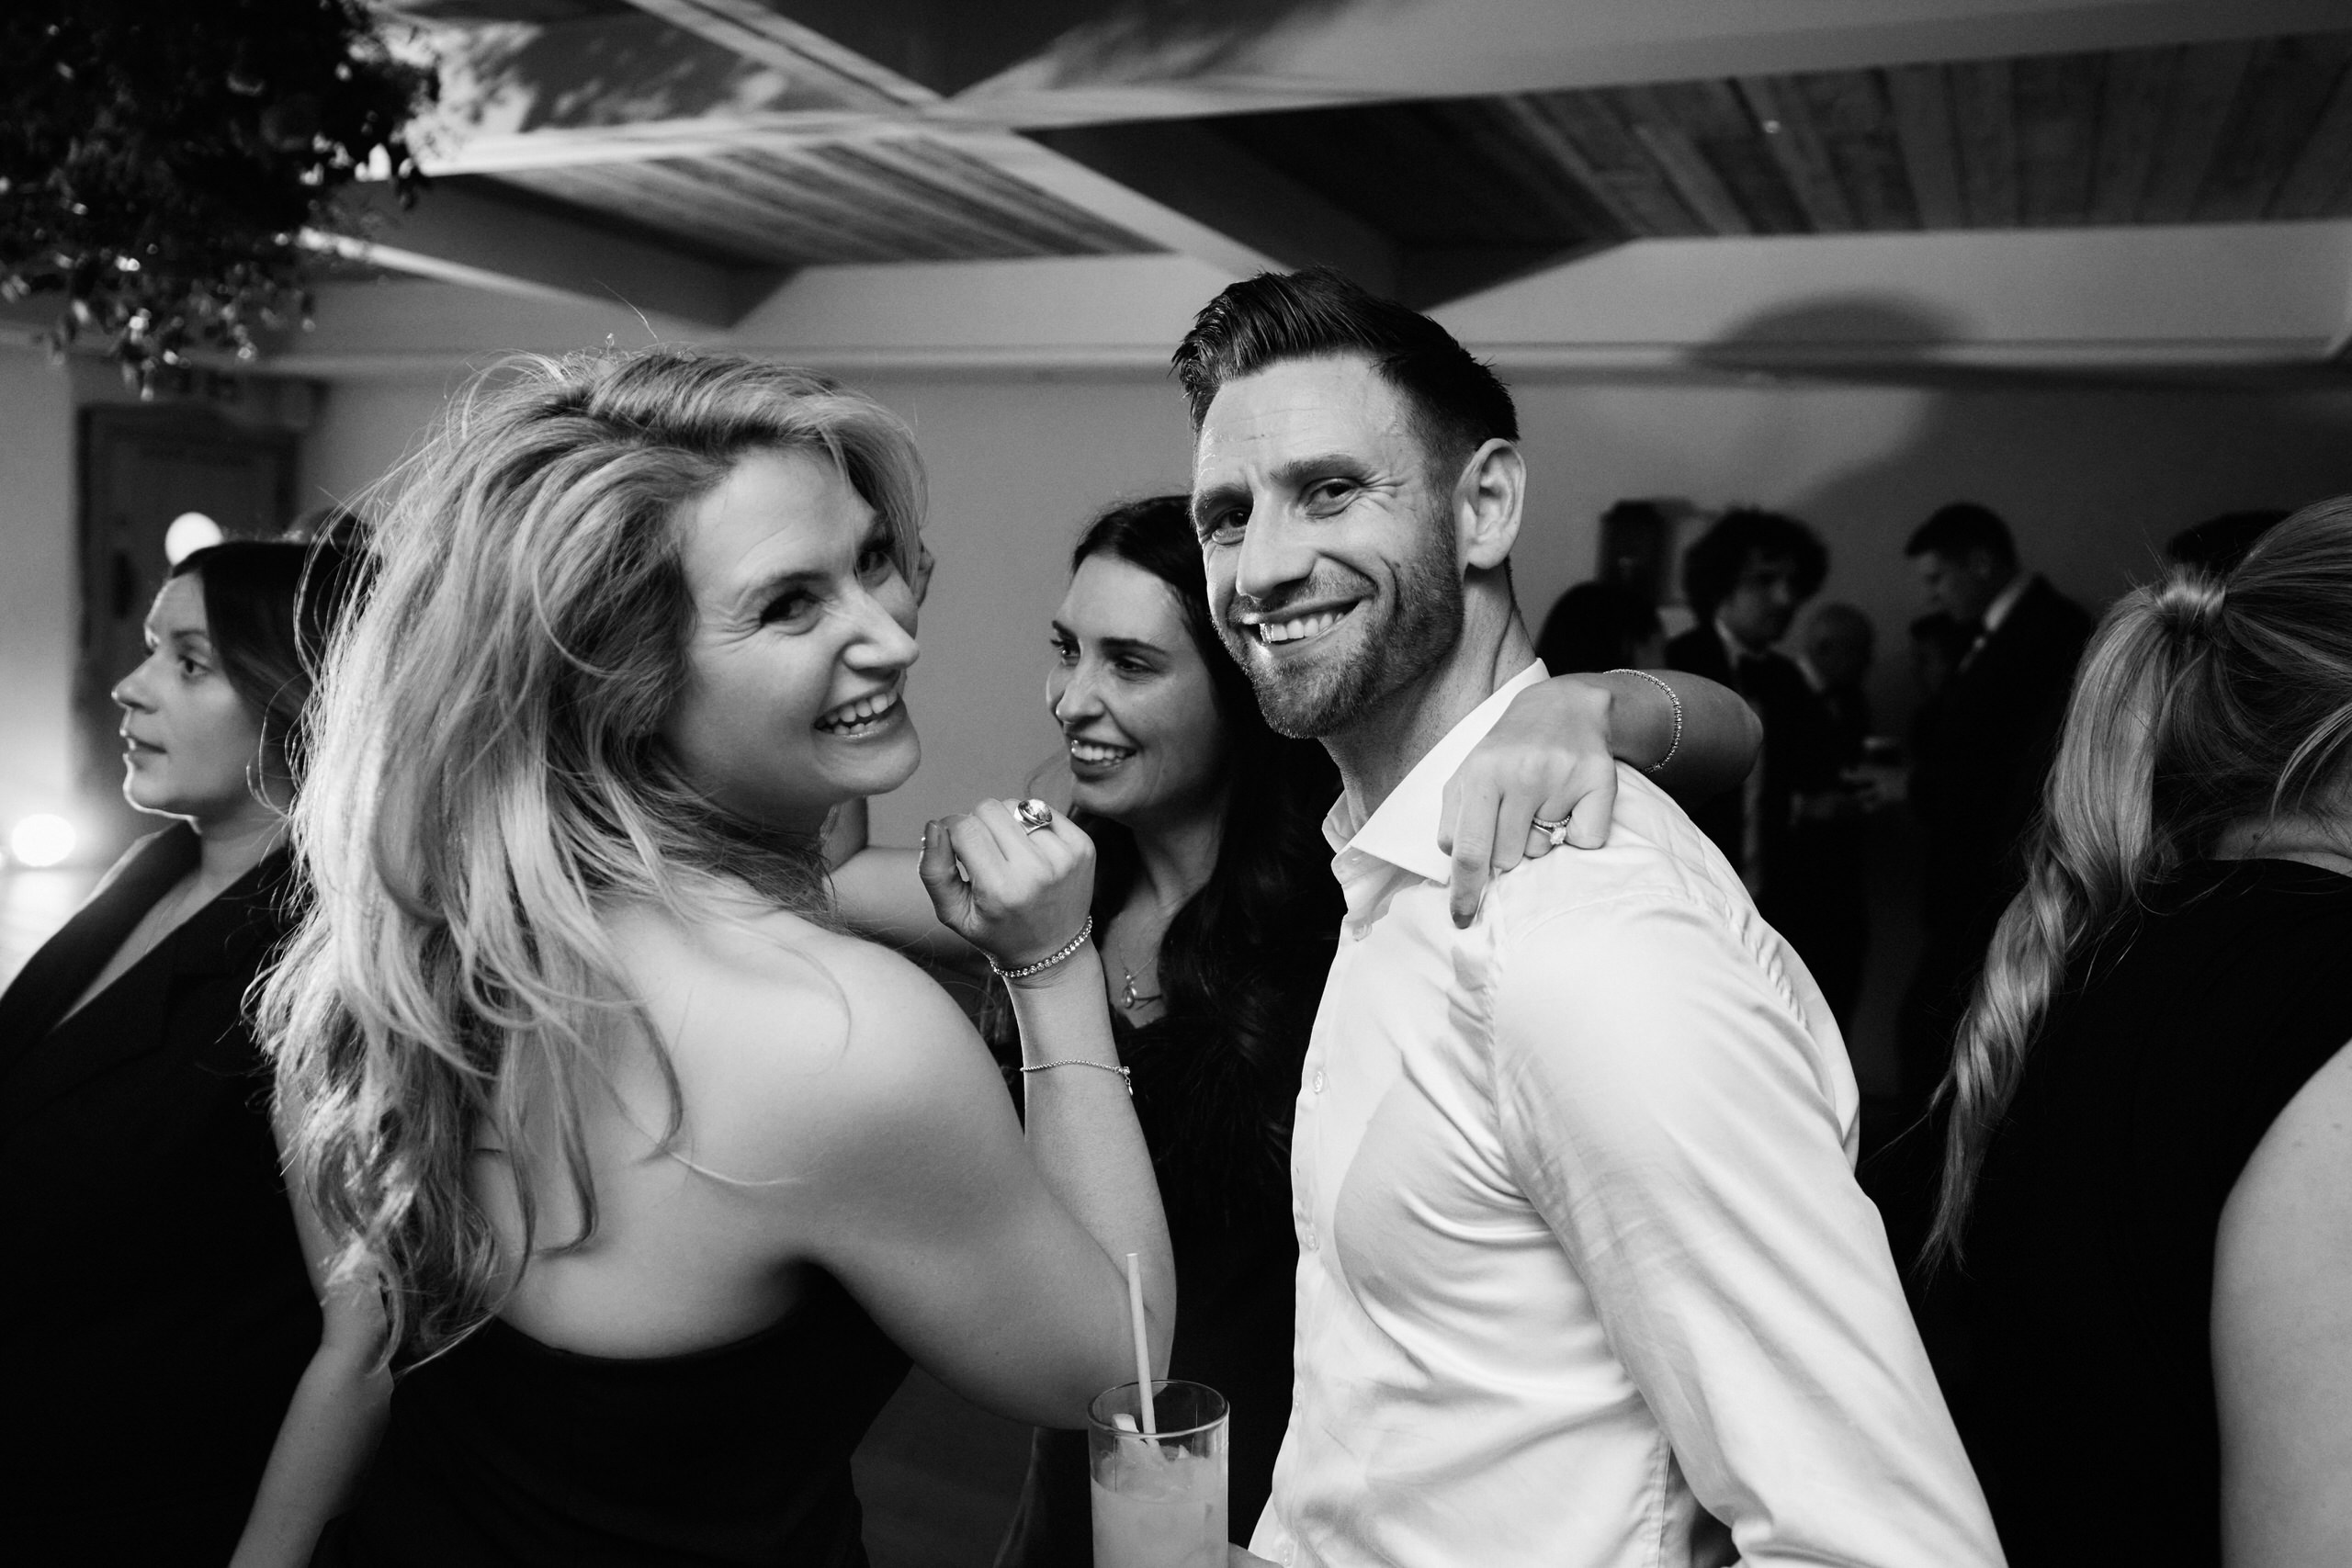 A black and white picture of a bunch of folks at a party.